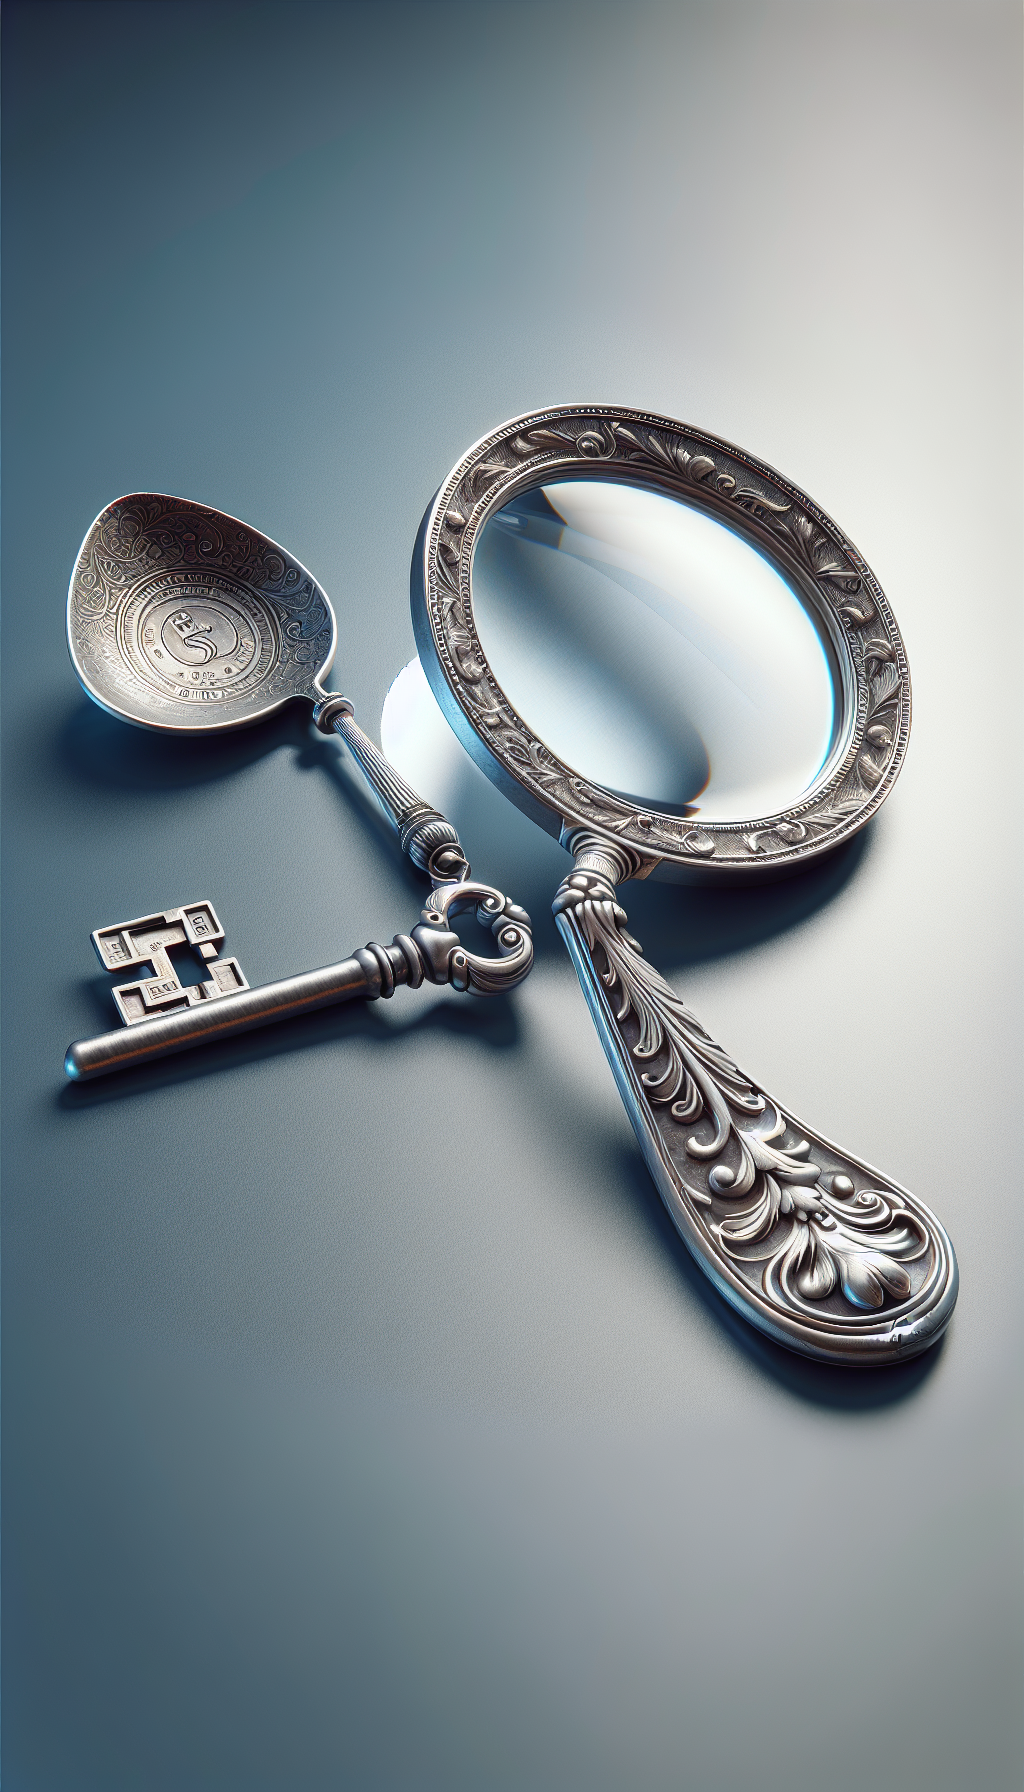 An elegantly engraved magnifying glass hovering over an intricately patterned antique silver spoon, with the glass lens revealing hallmarks stamped on the spoon's stem. The handle of the spoon morphs into an old-fashioned key, symbolizing unlocking the secrets to its identification. The contrasting styles of photorealism for the spoon and whimsy for the key blend history with the excitement of discovery.